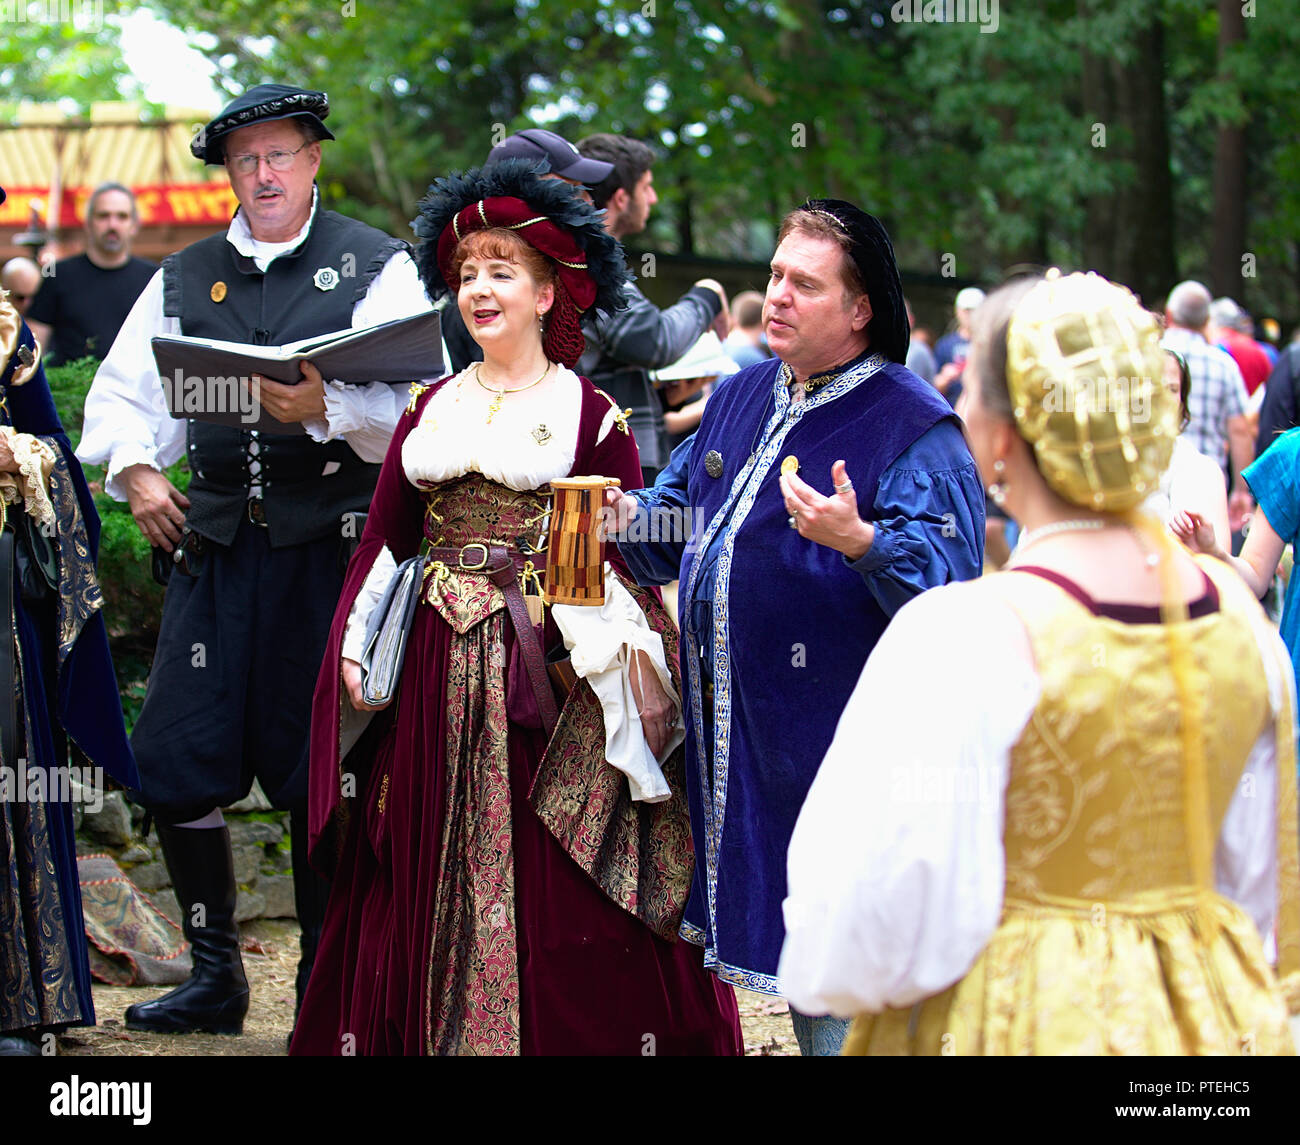 People attending Renaissance Festival in costumes Stock Photo - Alamy